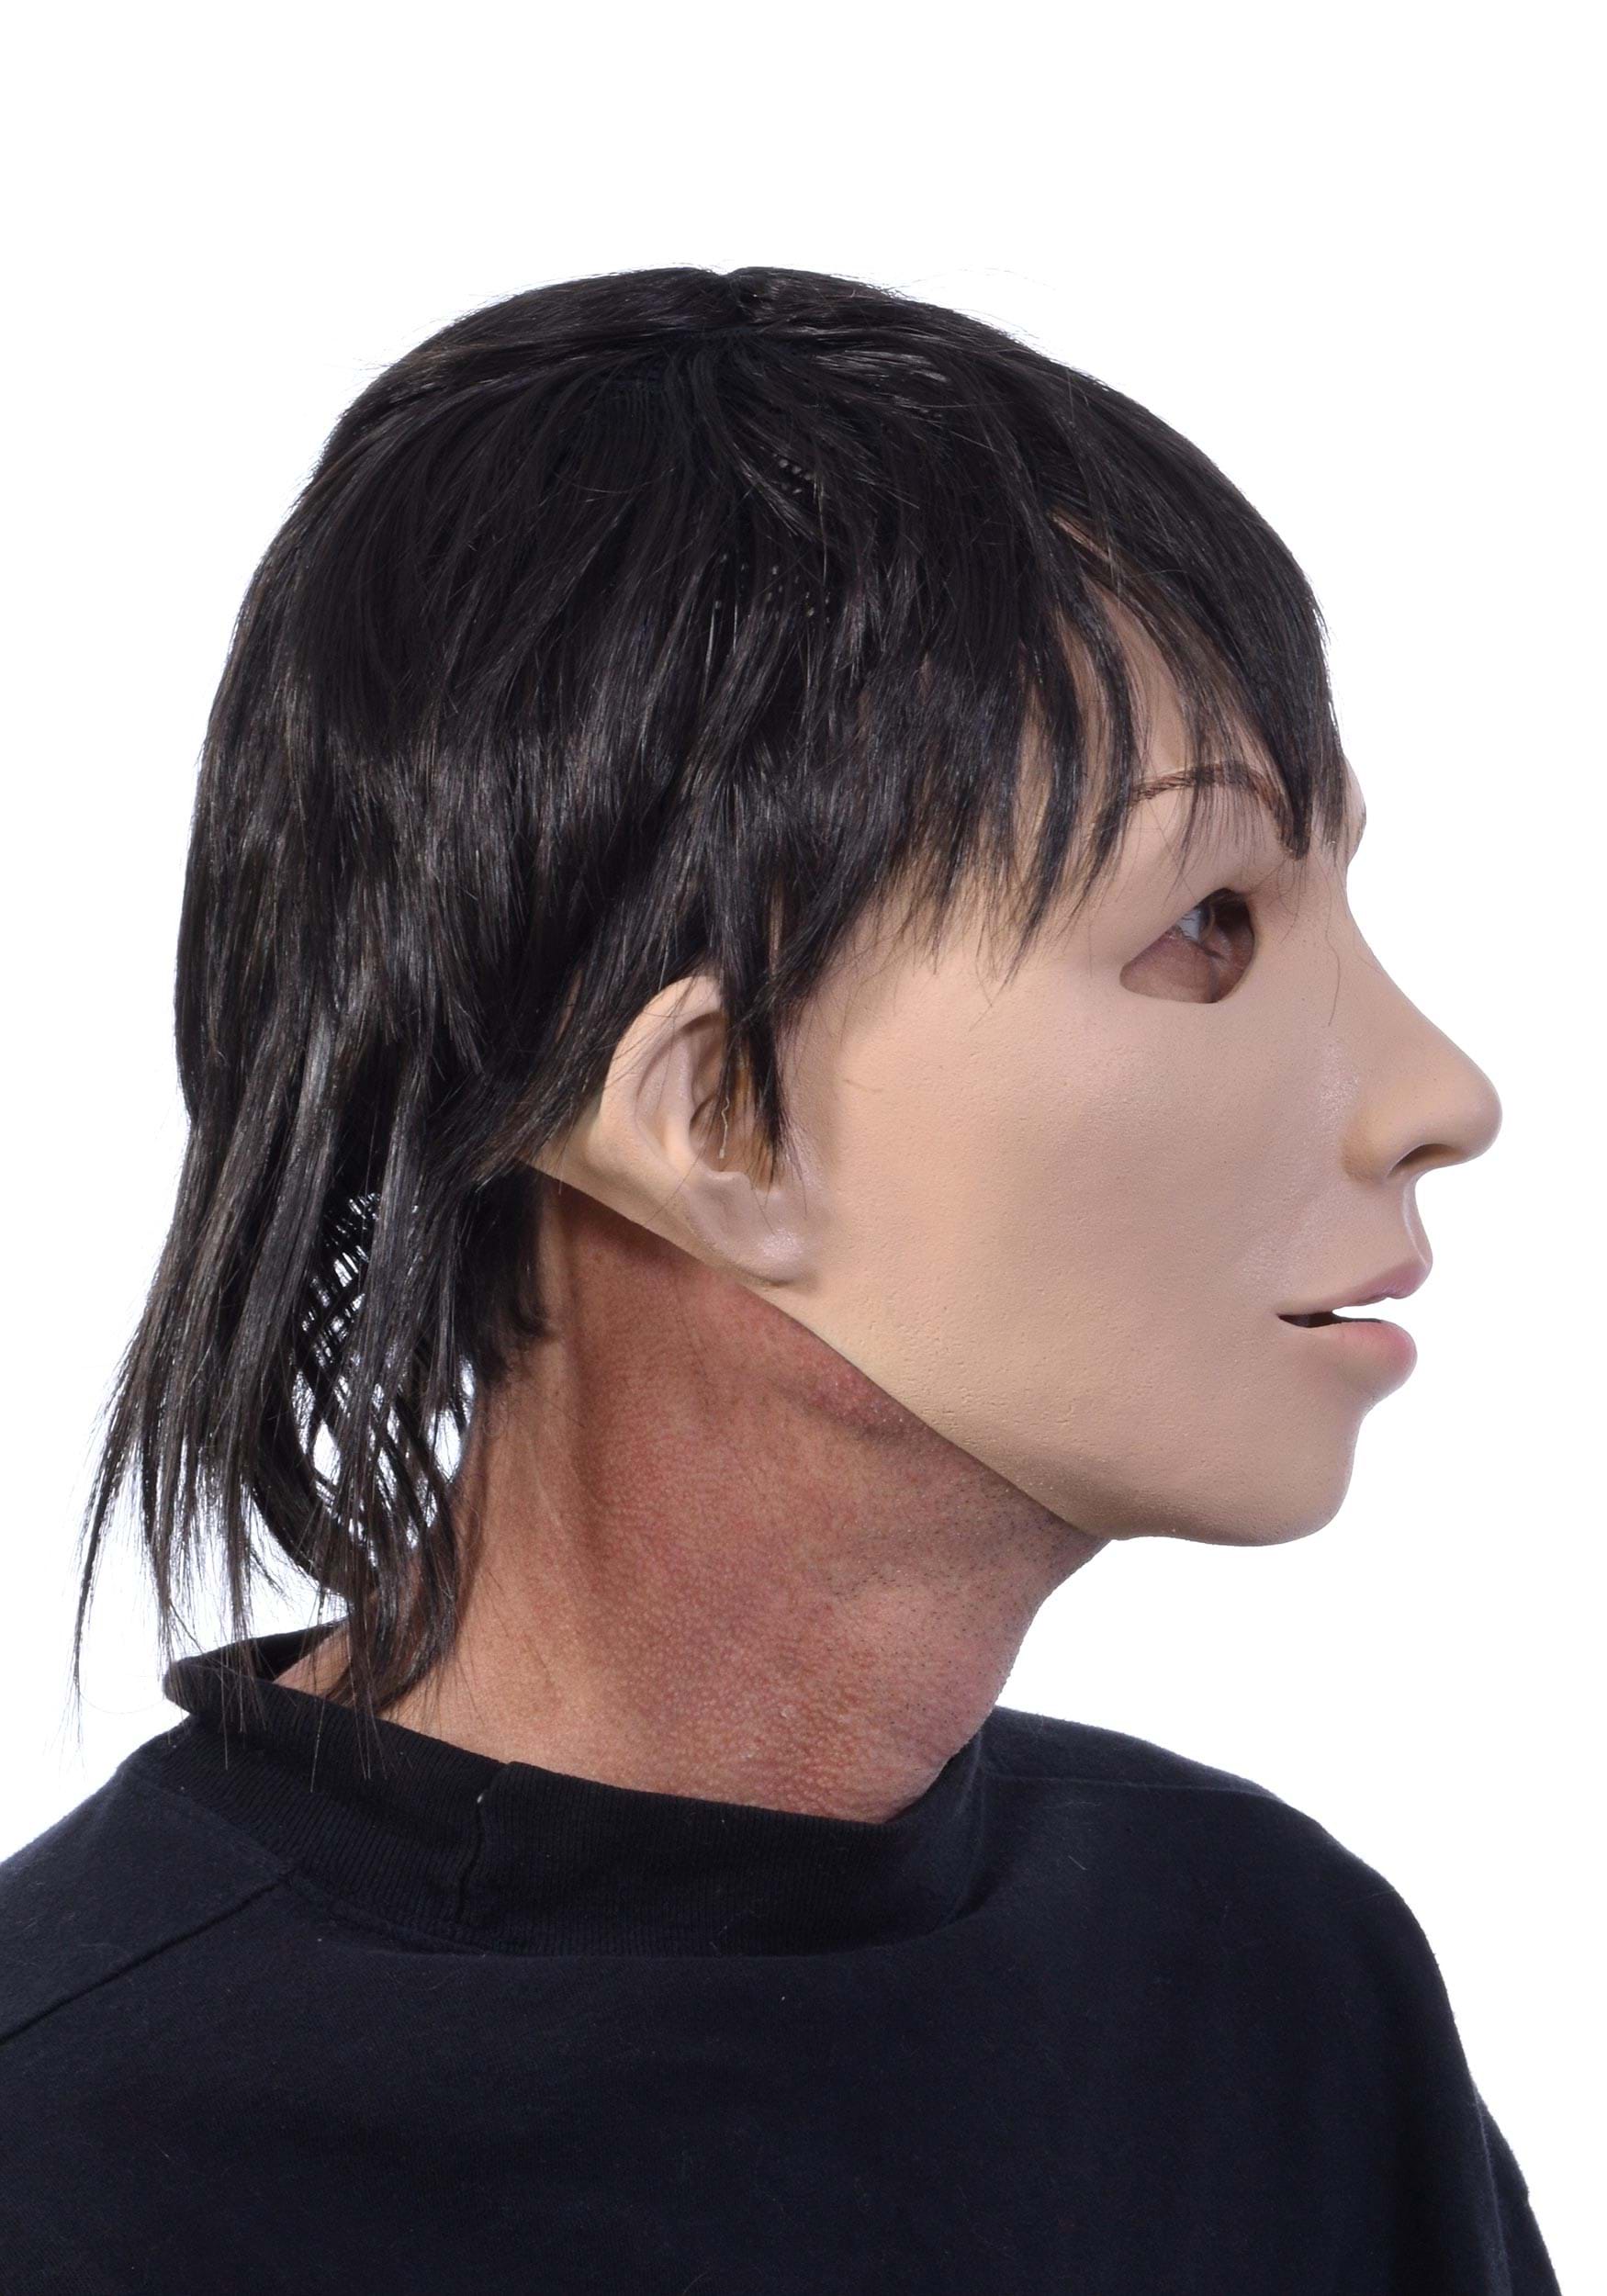 Soft And Real Alex Mask For Adults